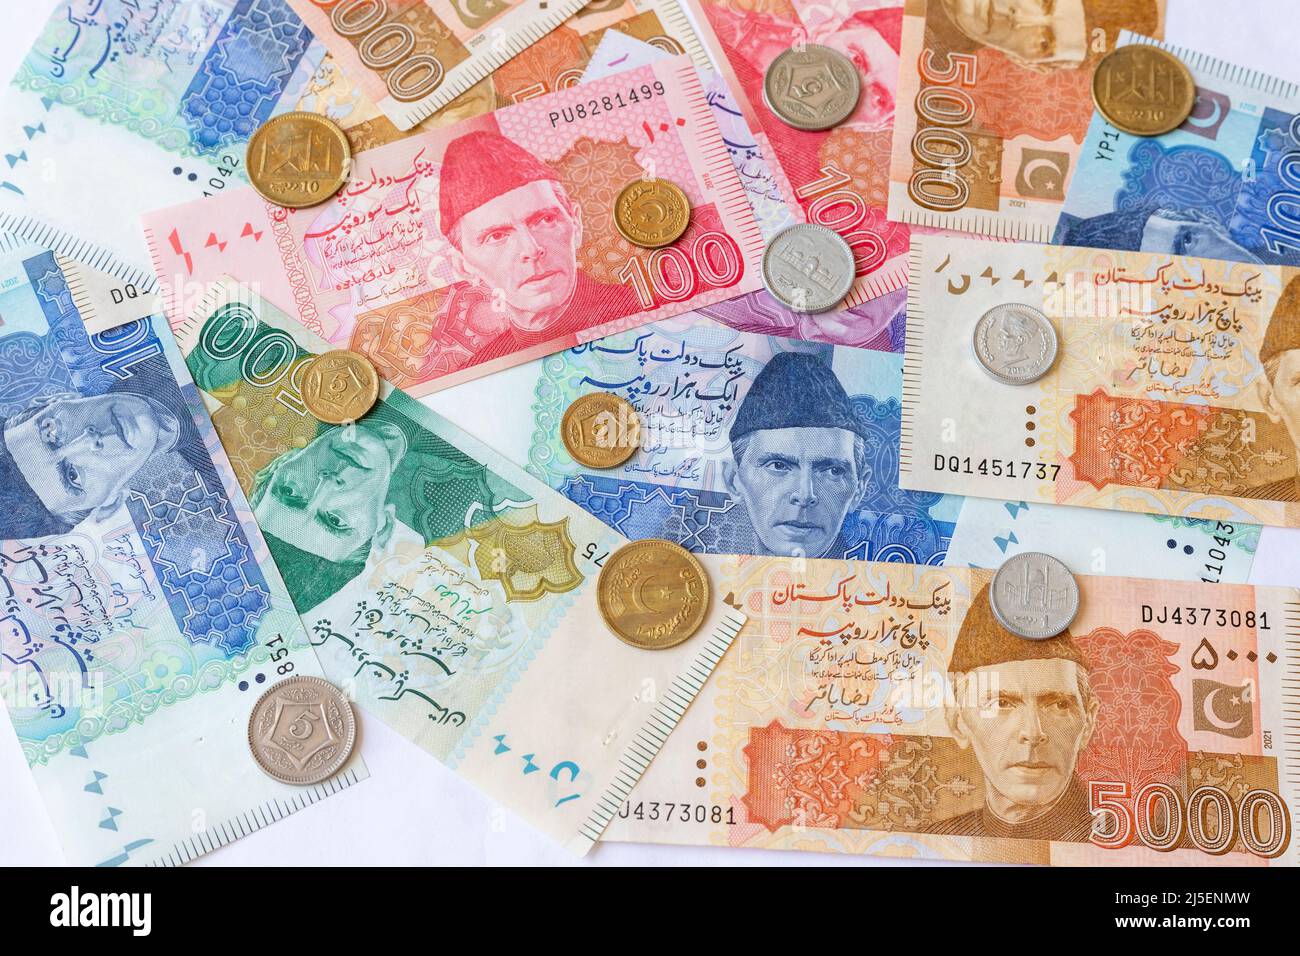 Pakistani paper currency notes with coins Stock Photo